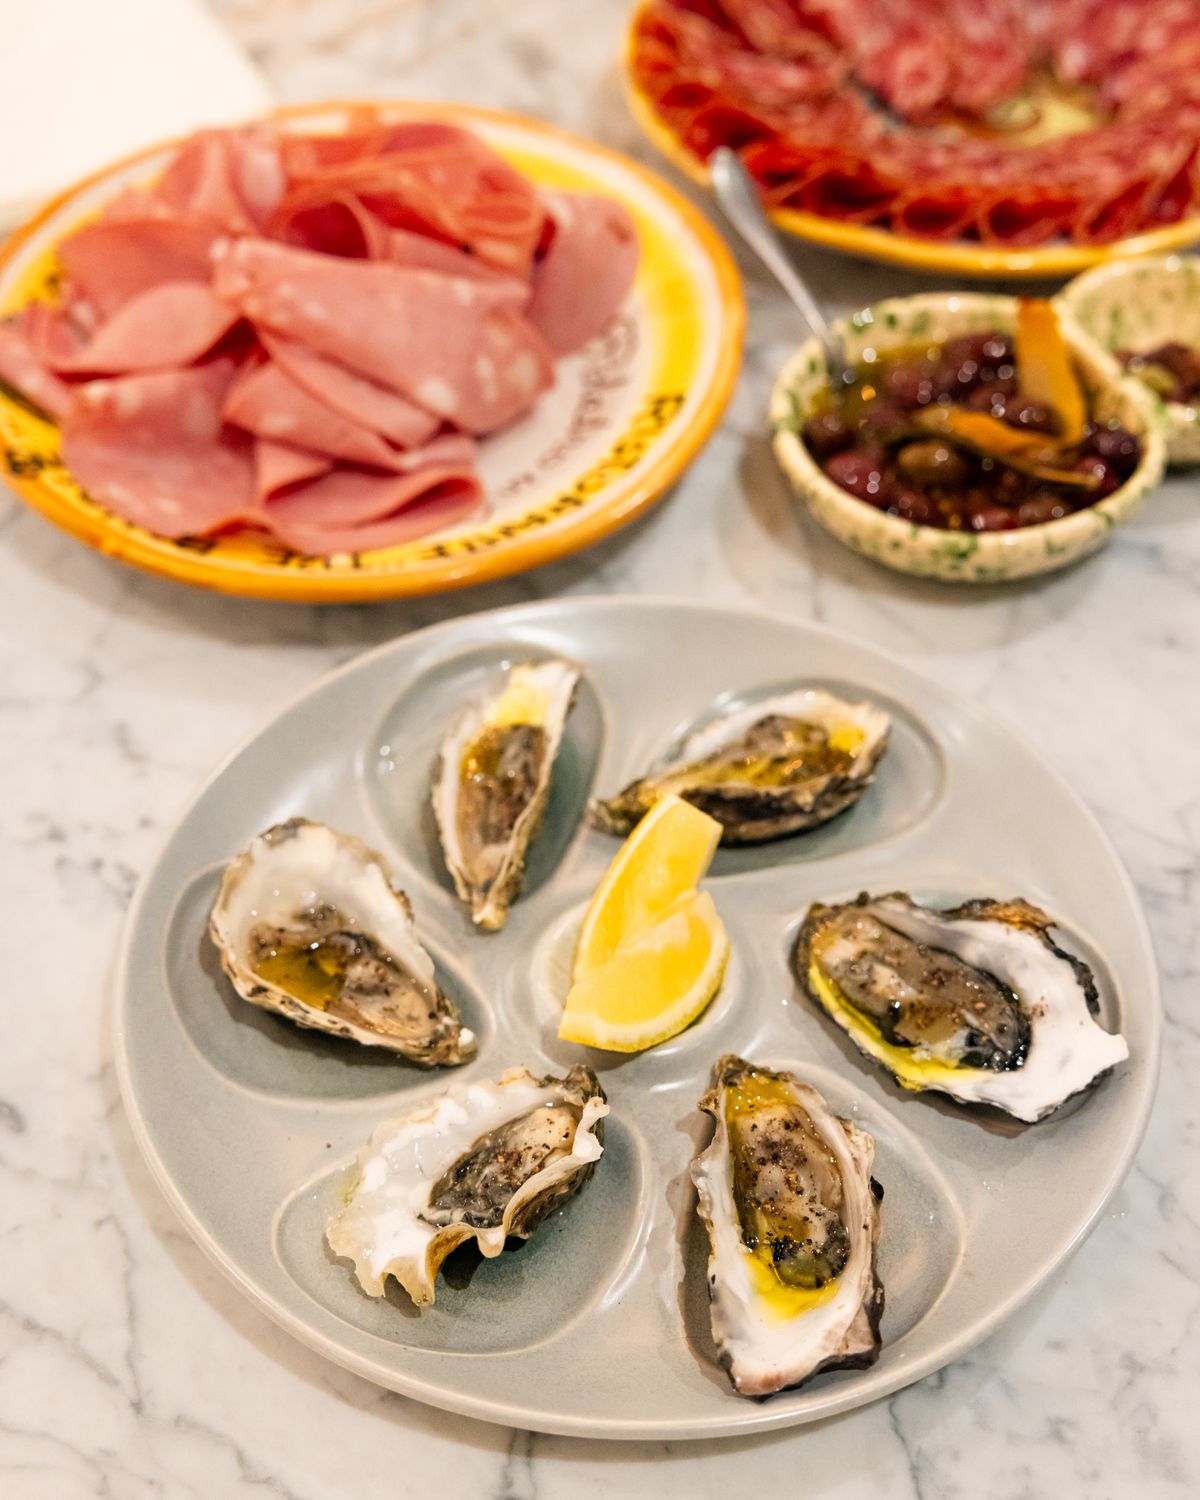 A plate of oysters next to plates of Italian sliced meats.